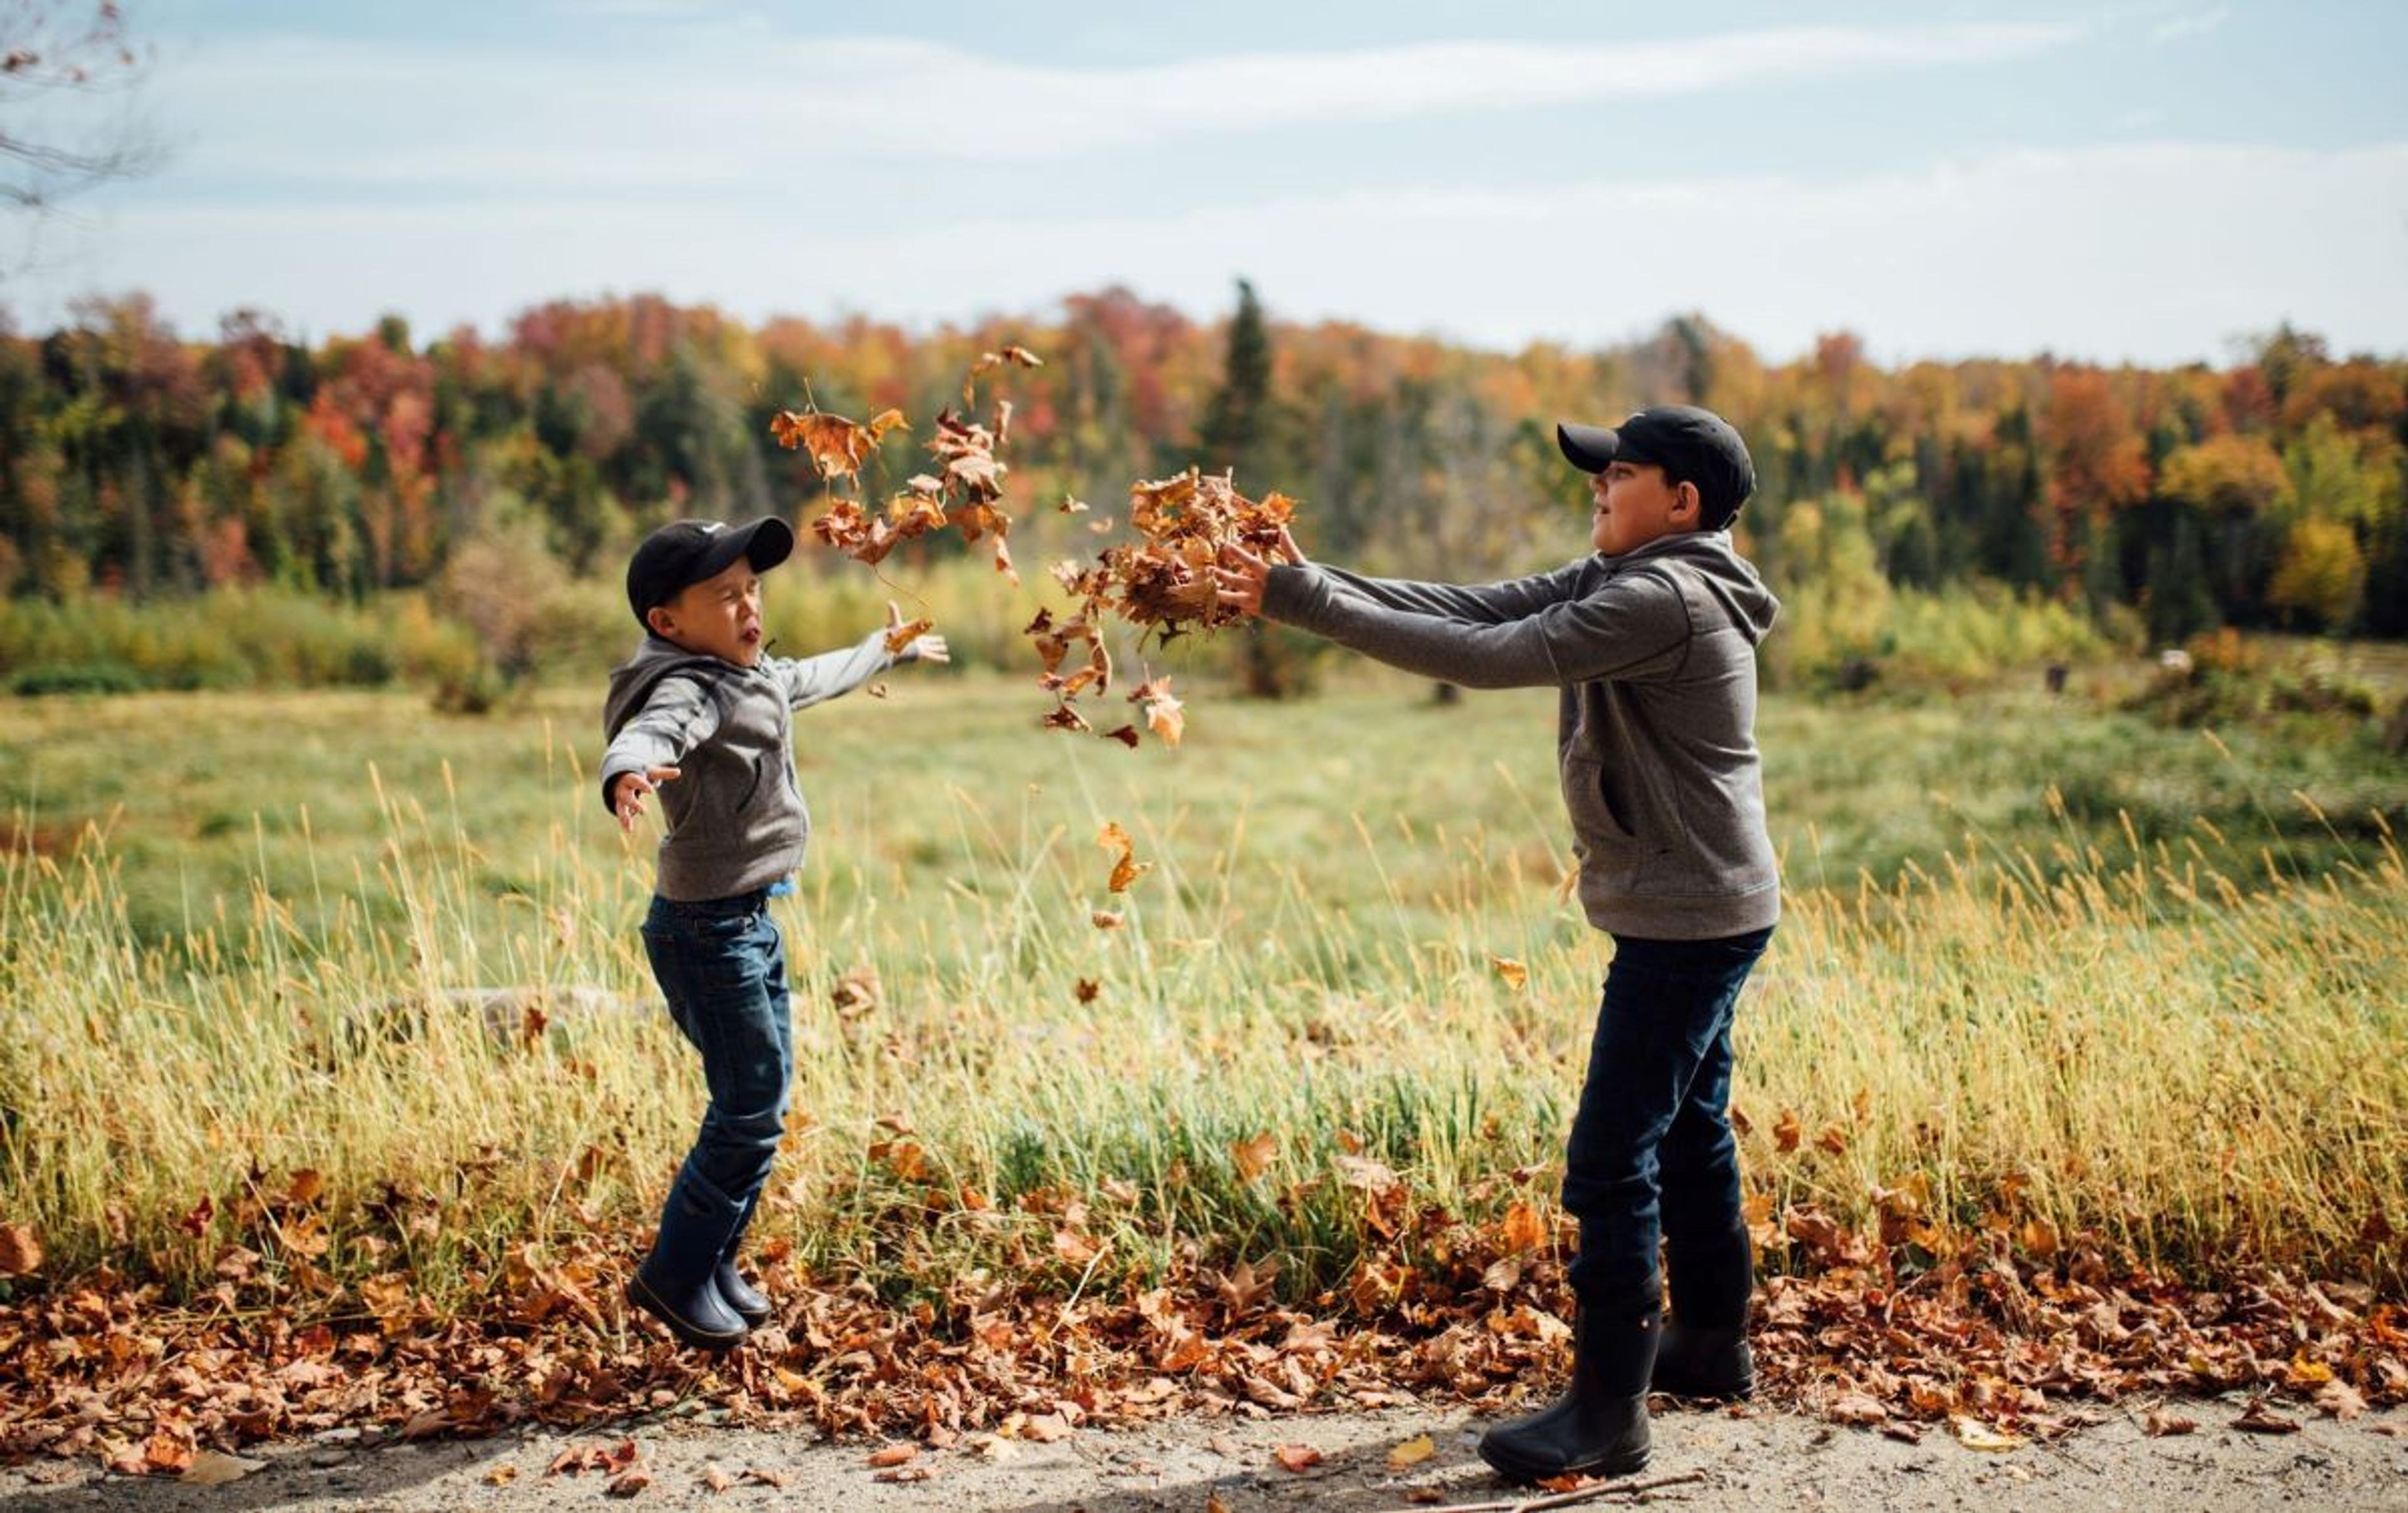 The Corse boys throw leaves.